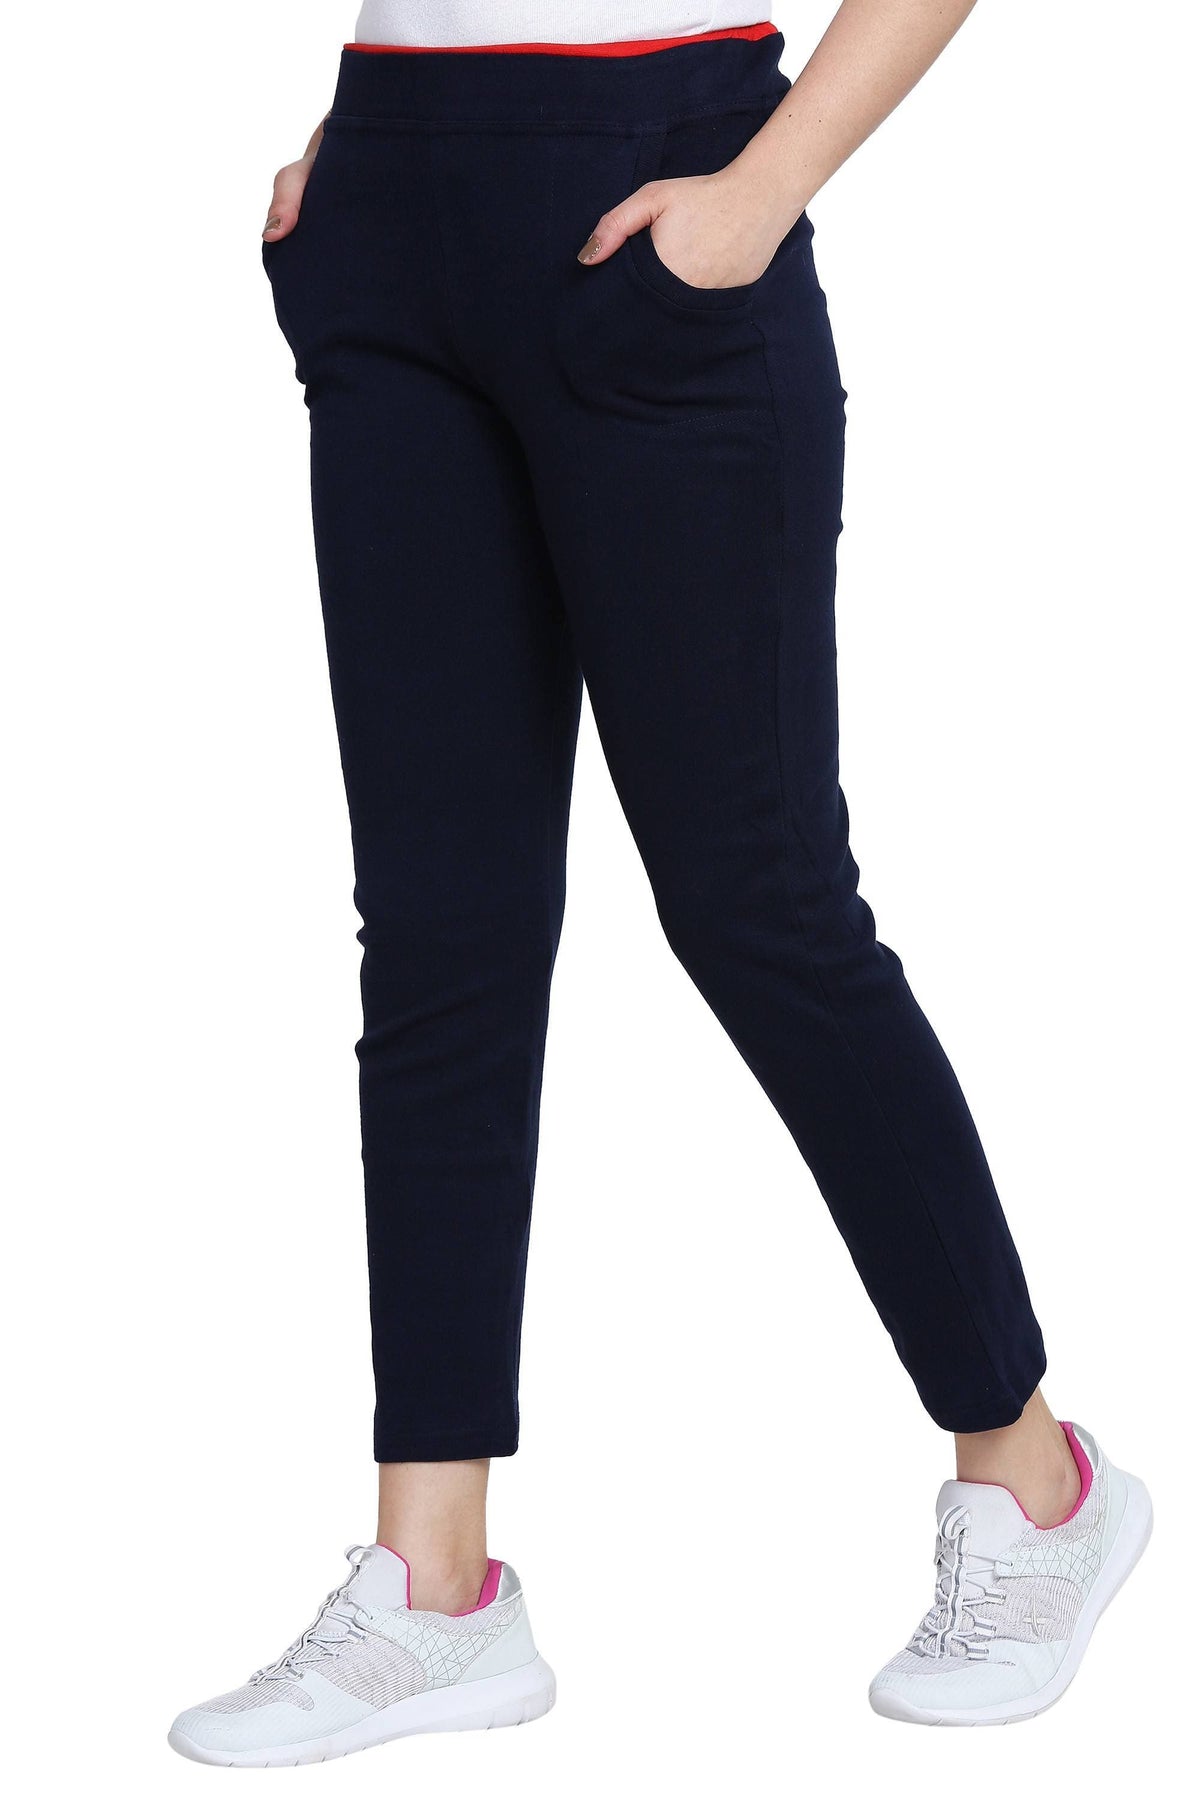 Buy Asmaani Navy Blue color Hosiery Lower with Two Side Pockets. Online ...